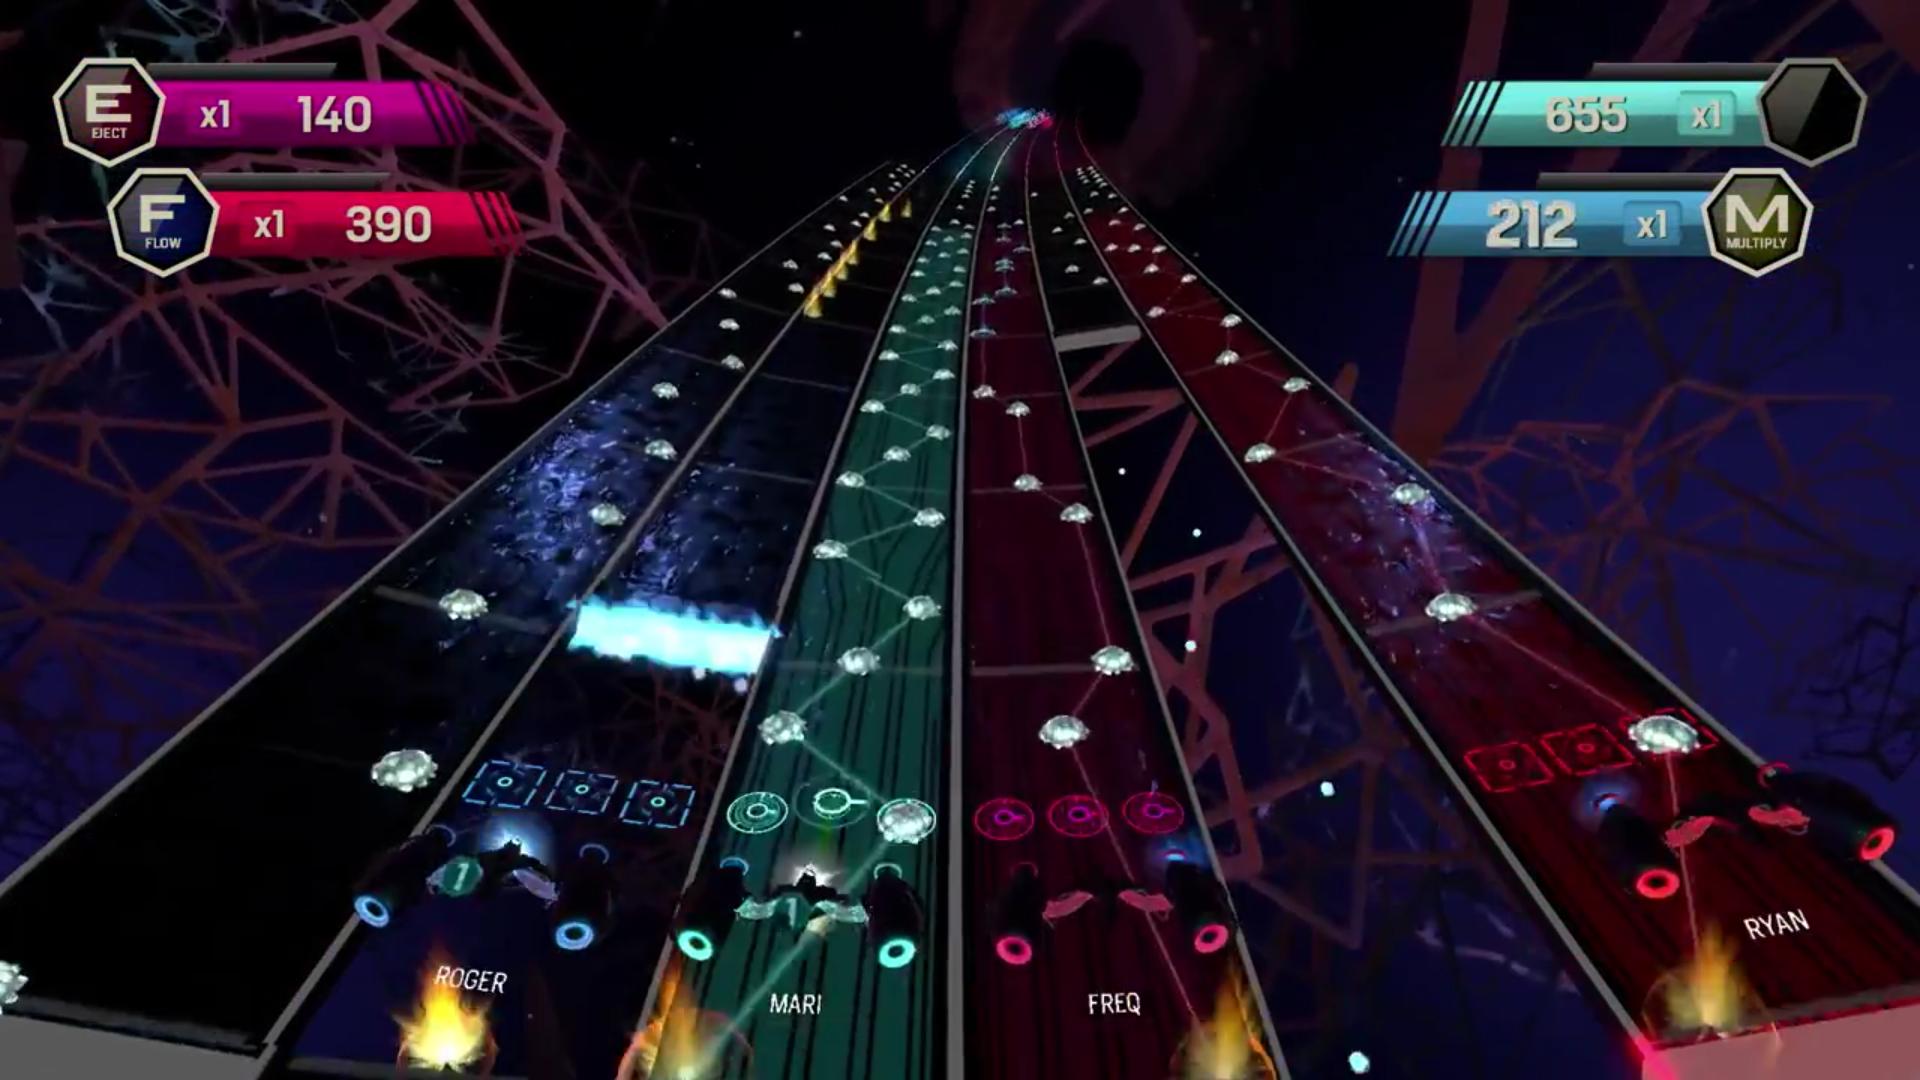 Gameplay Trailer for the Amplitude Reboot Demos Co-Op Competitive Play